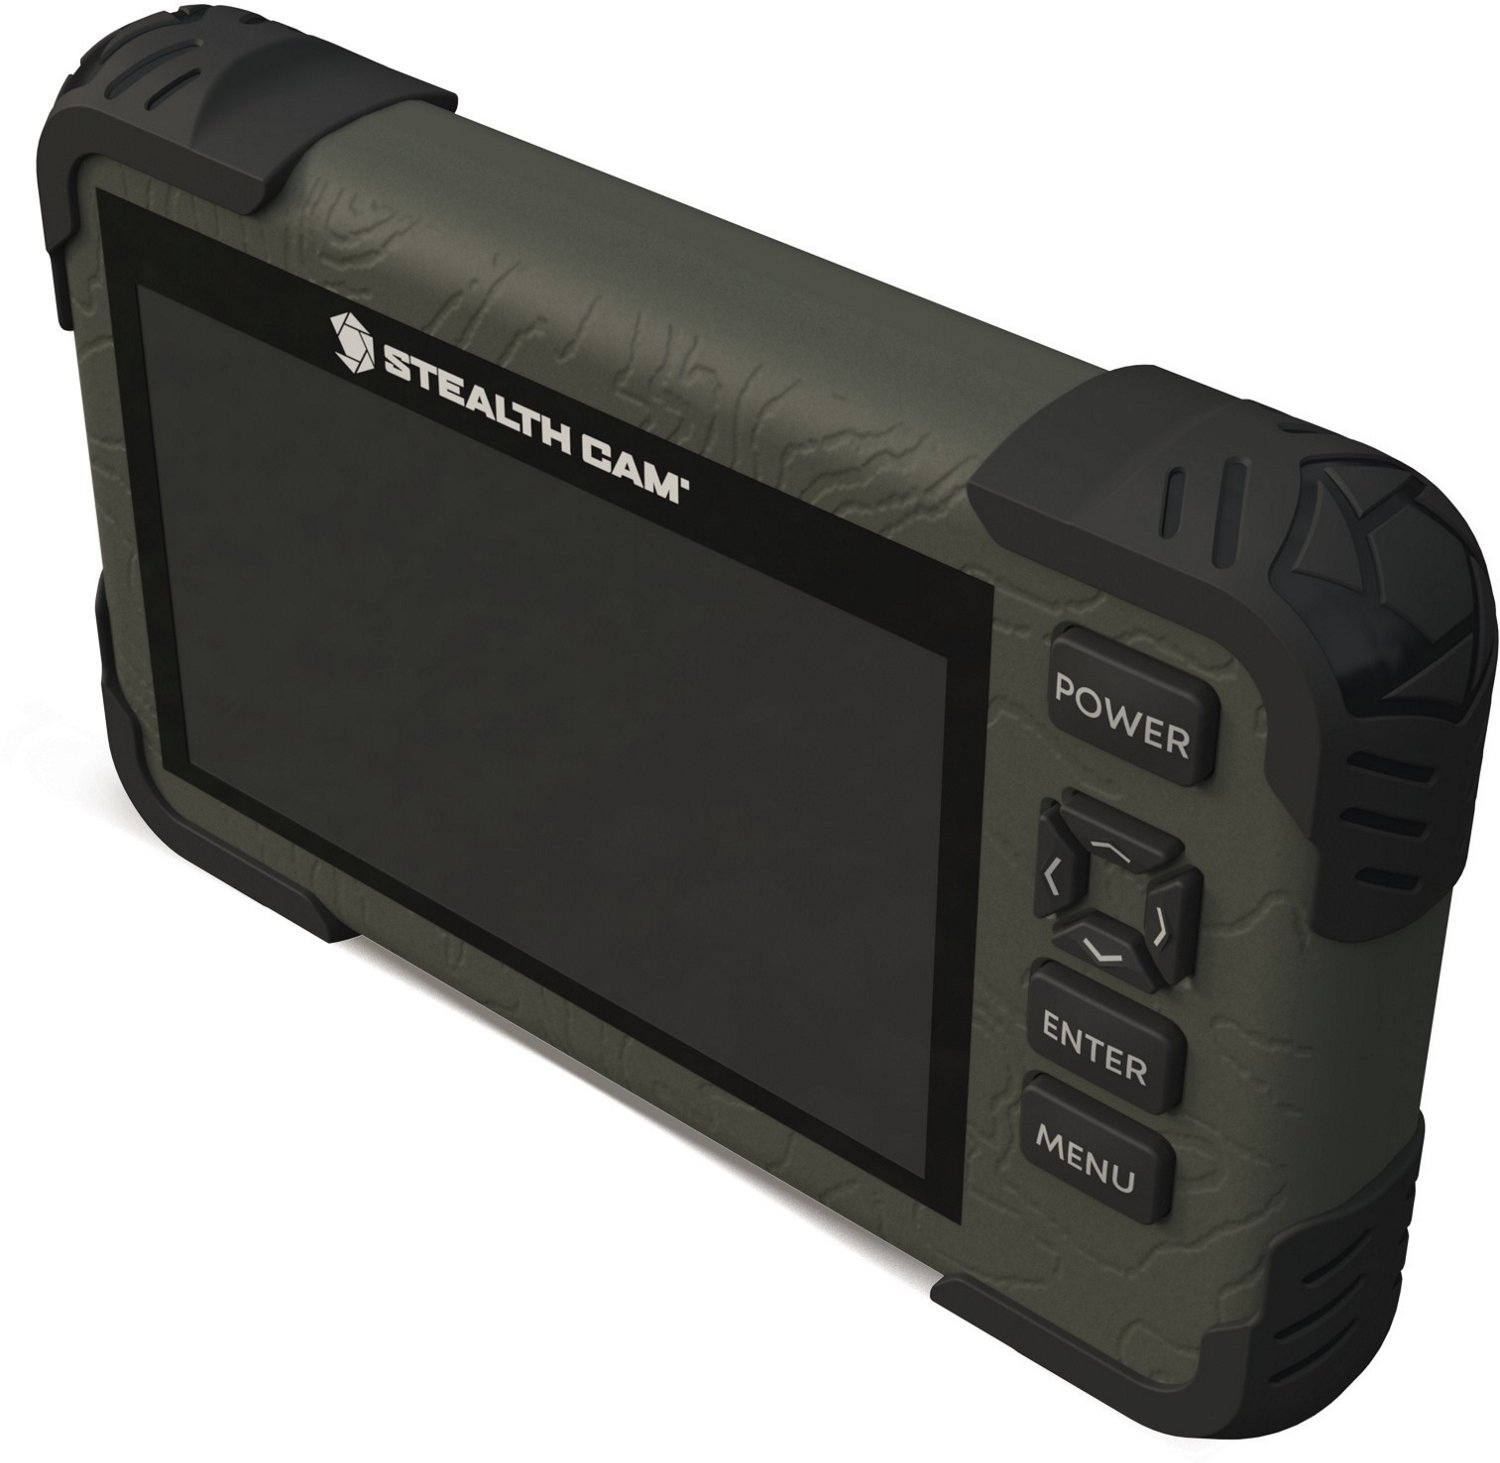 Stealth Cam STC-CRV43 4.3 inch LCD Screen Reader and Viewer for sale online 